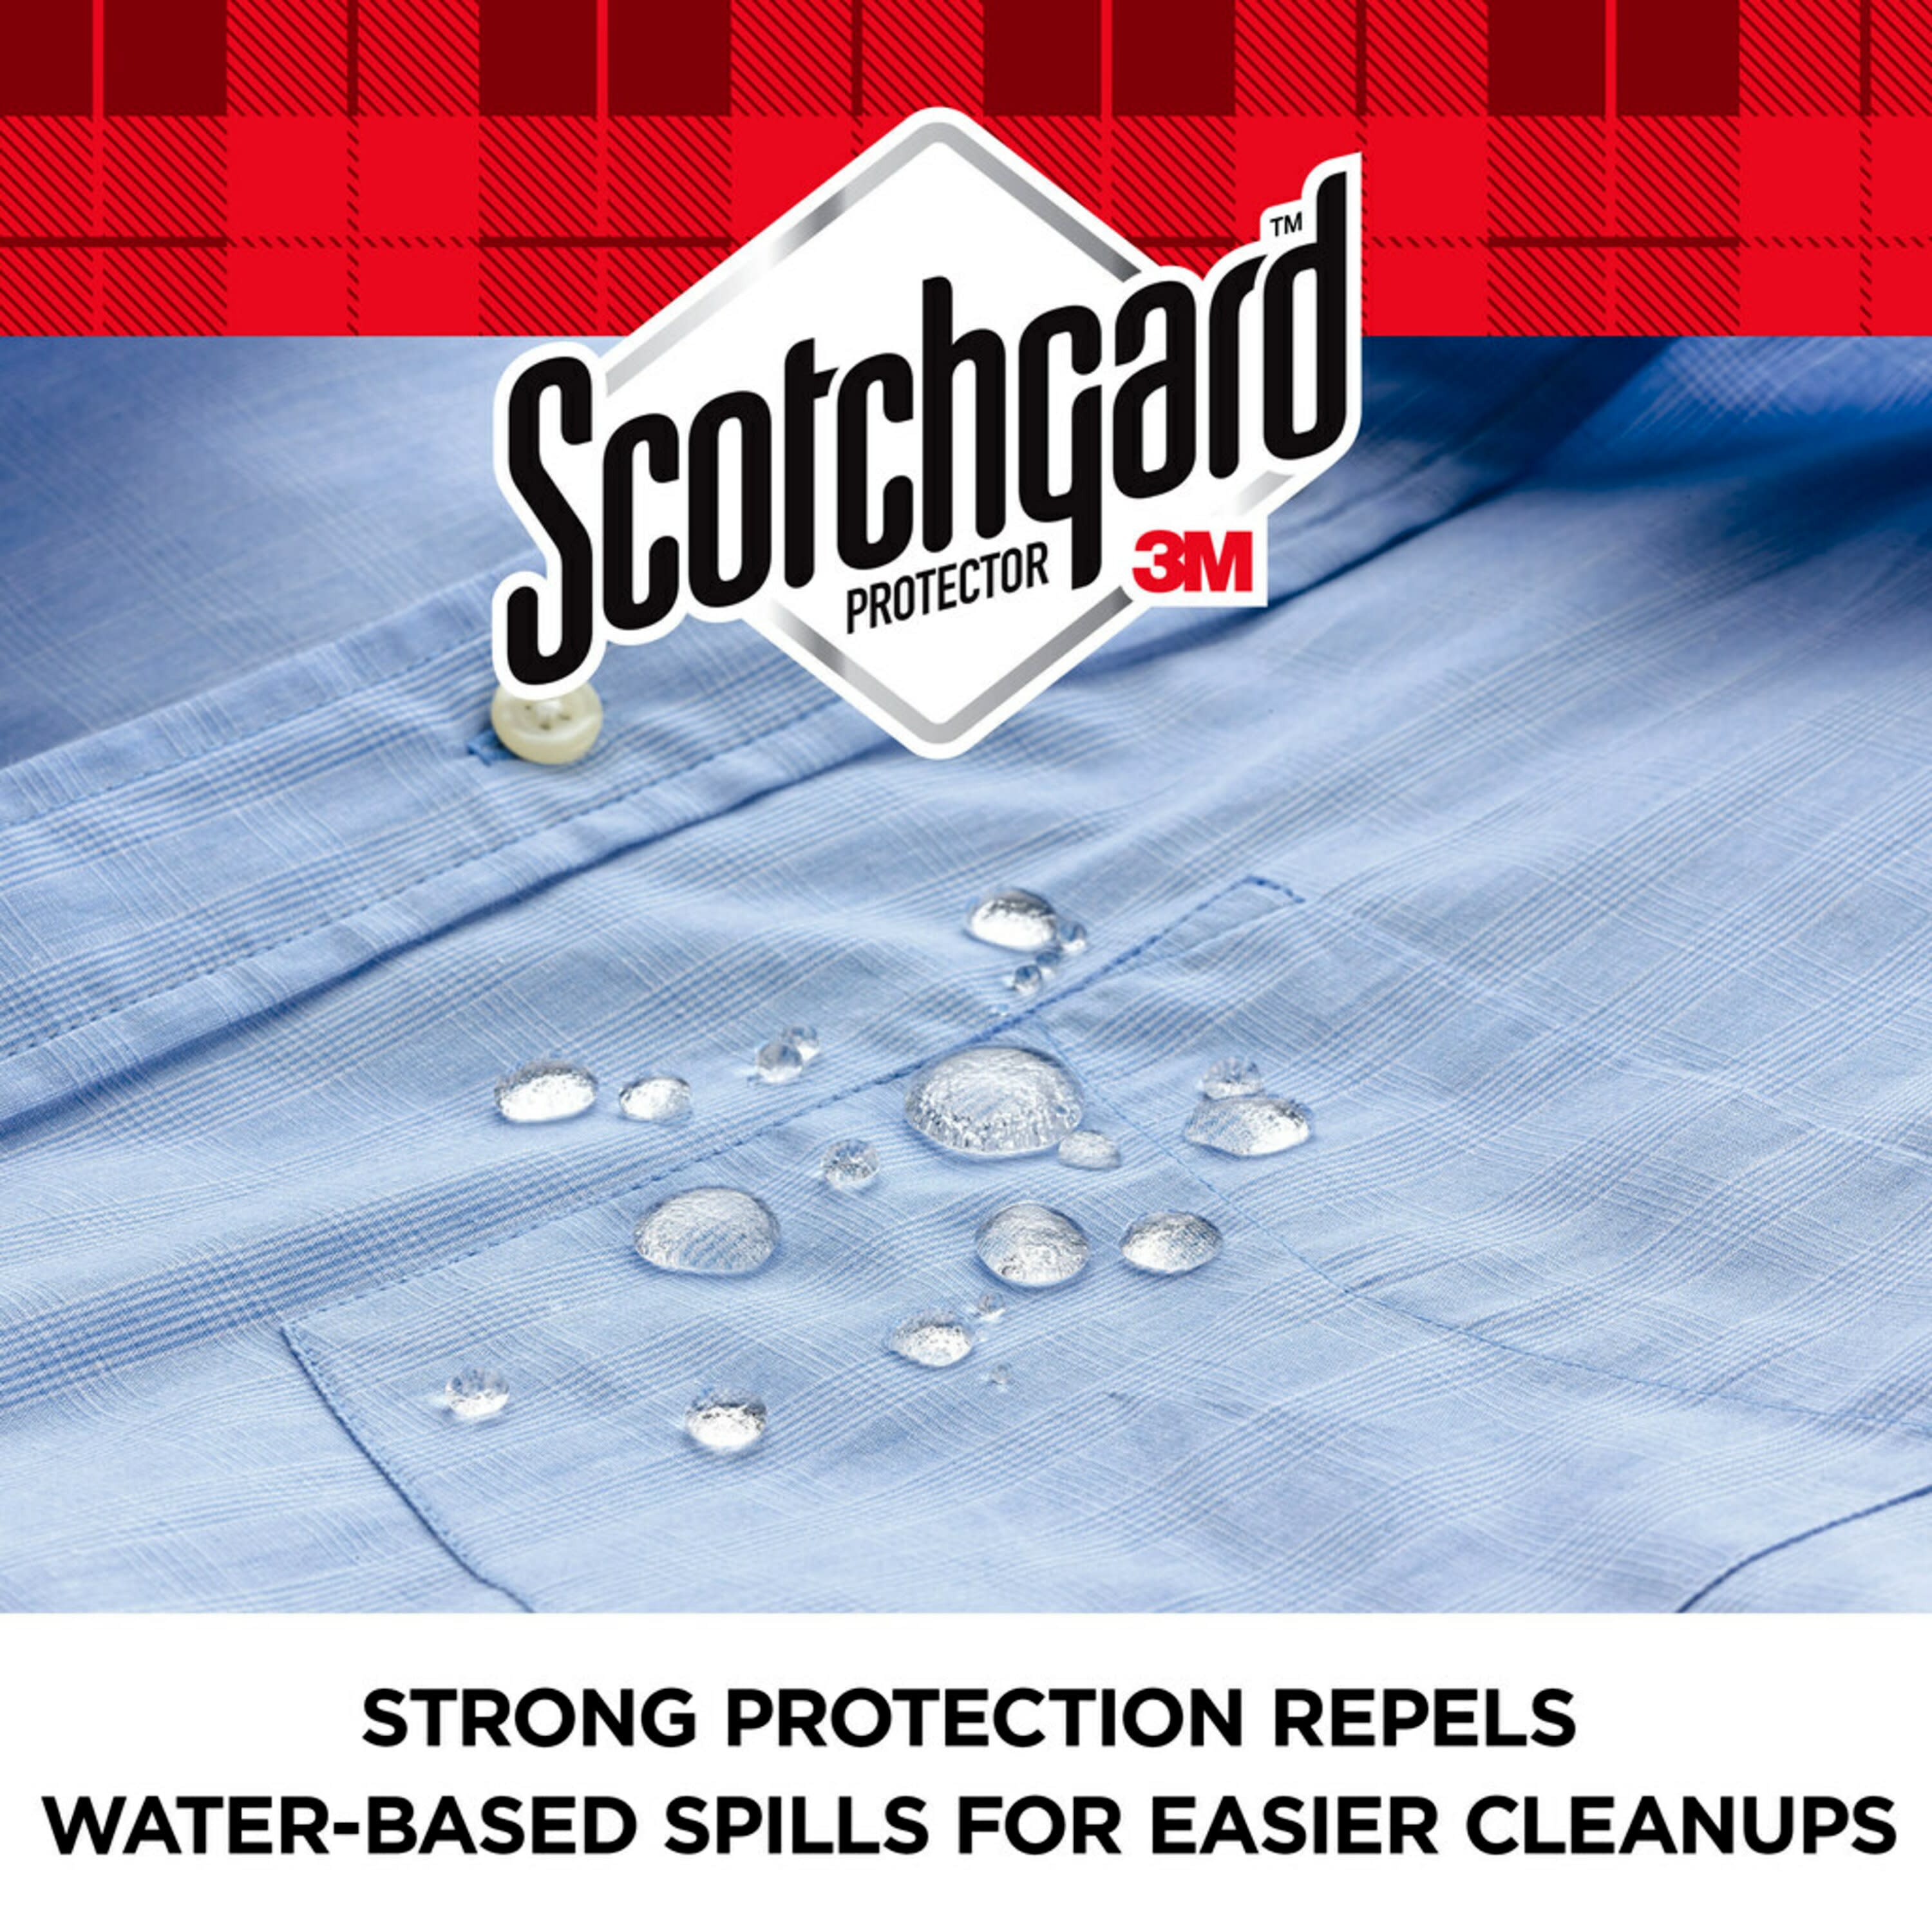 3M Scotchgard Protector & Cleaners - 3M Scotchgard Fabric Cleaner Wholesale  Trader from New Delhi